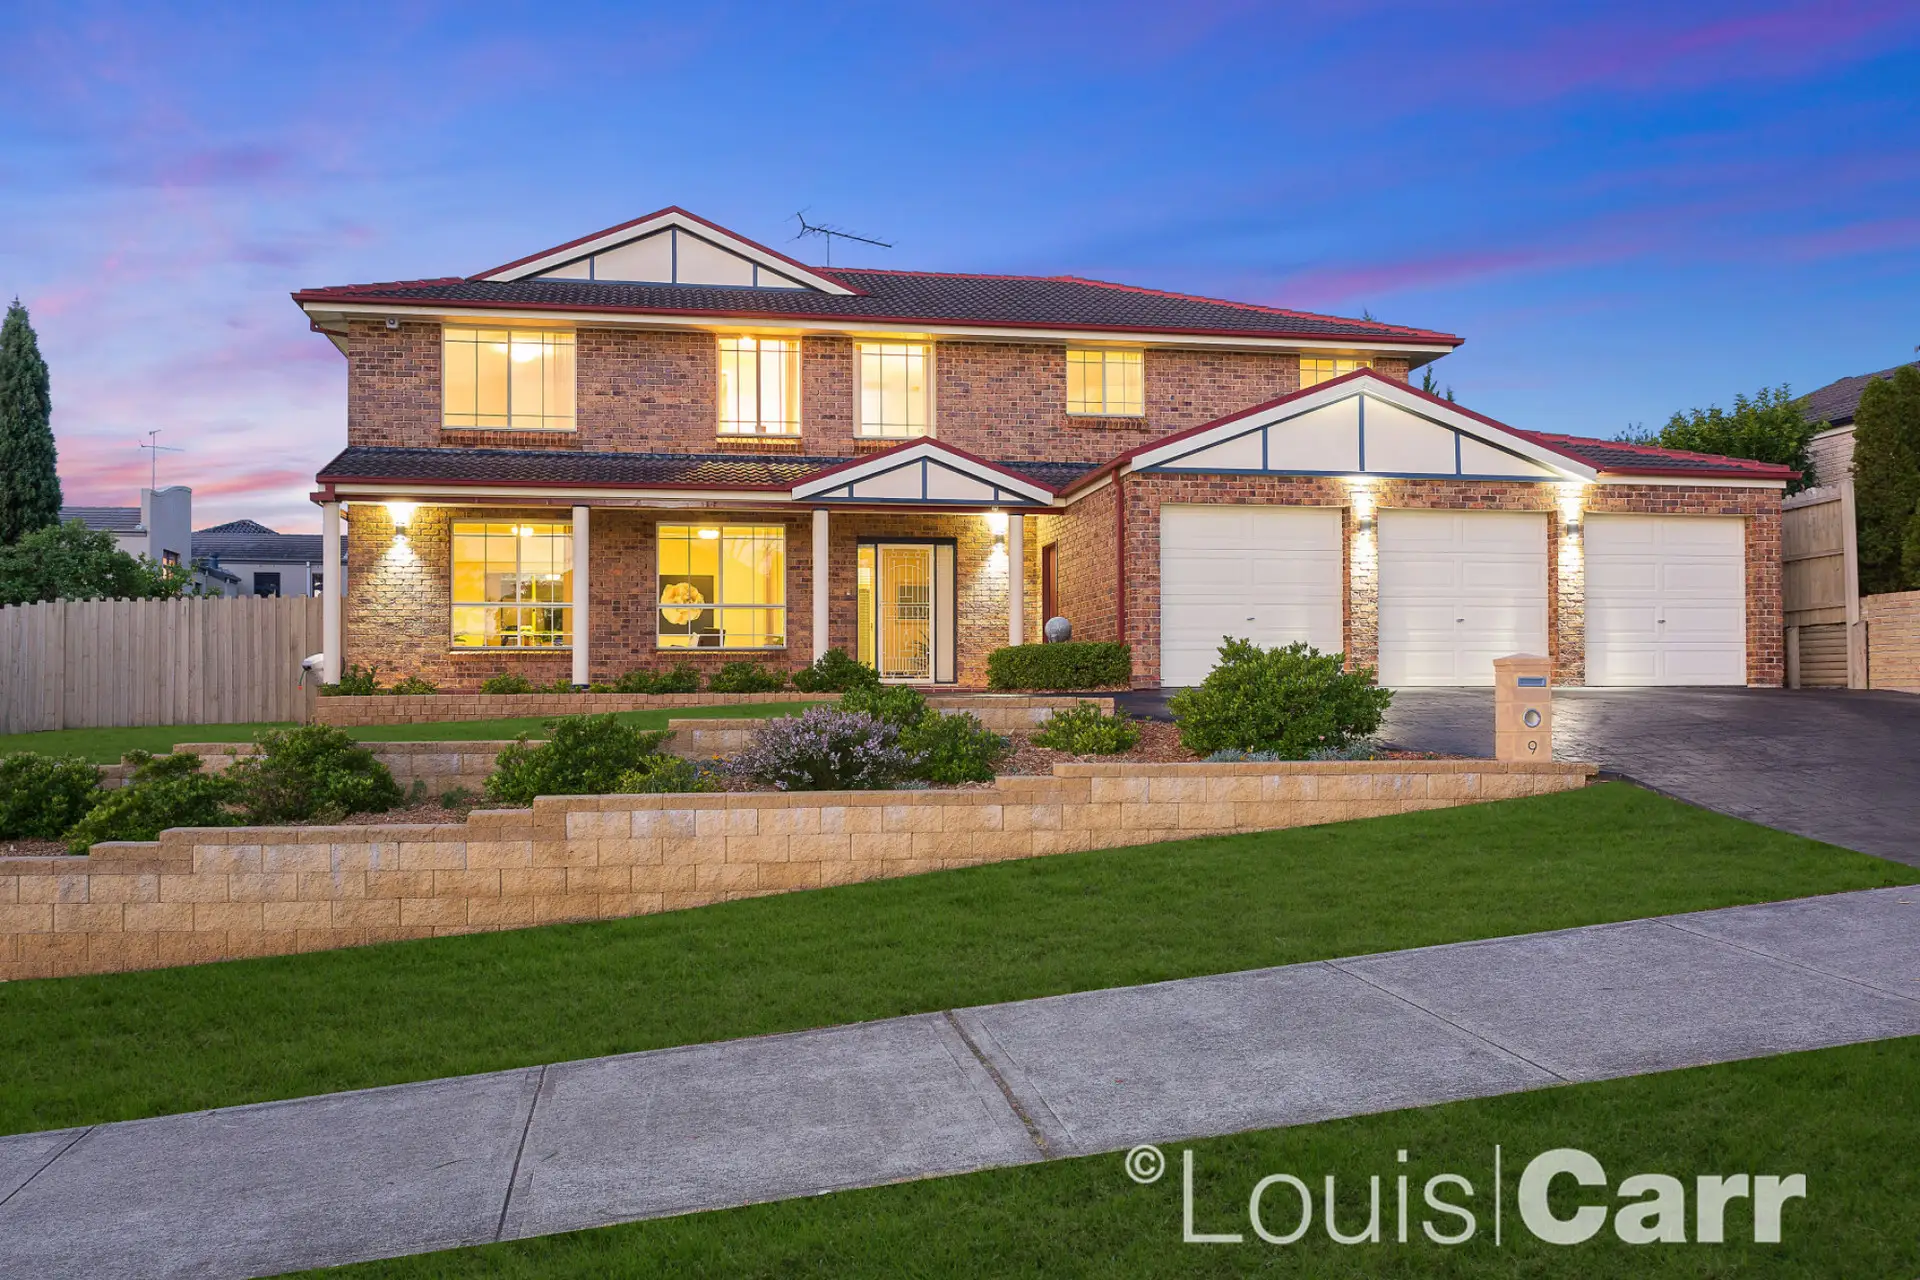 Photo #1: 9 Hermitage Avenue, Kellyville - Sold by Louis Carr Real Estate